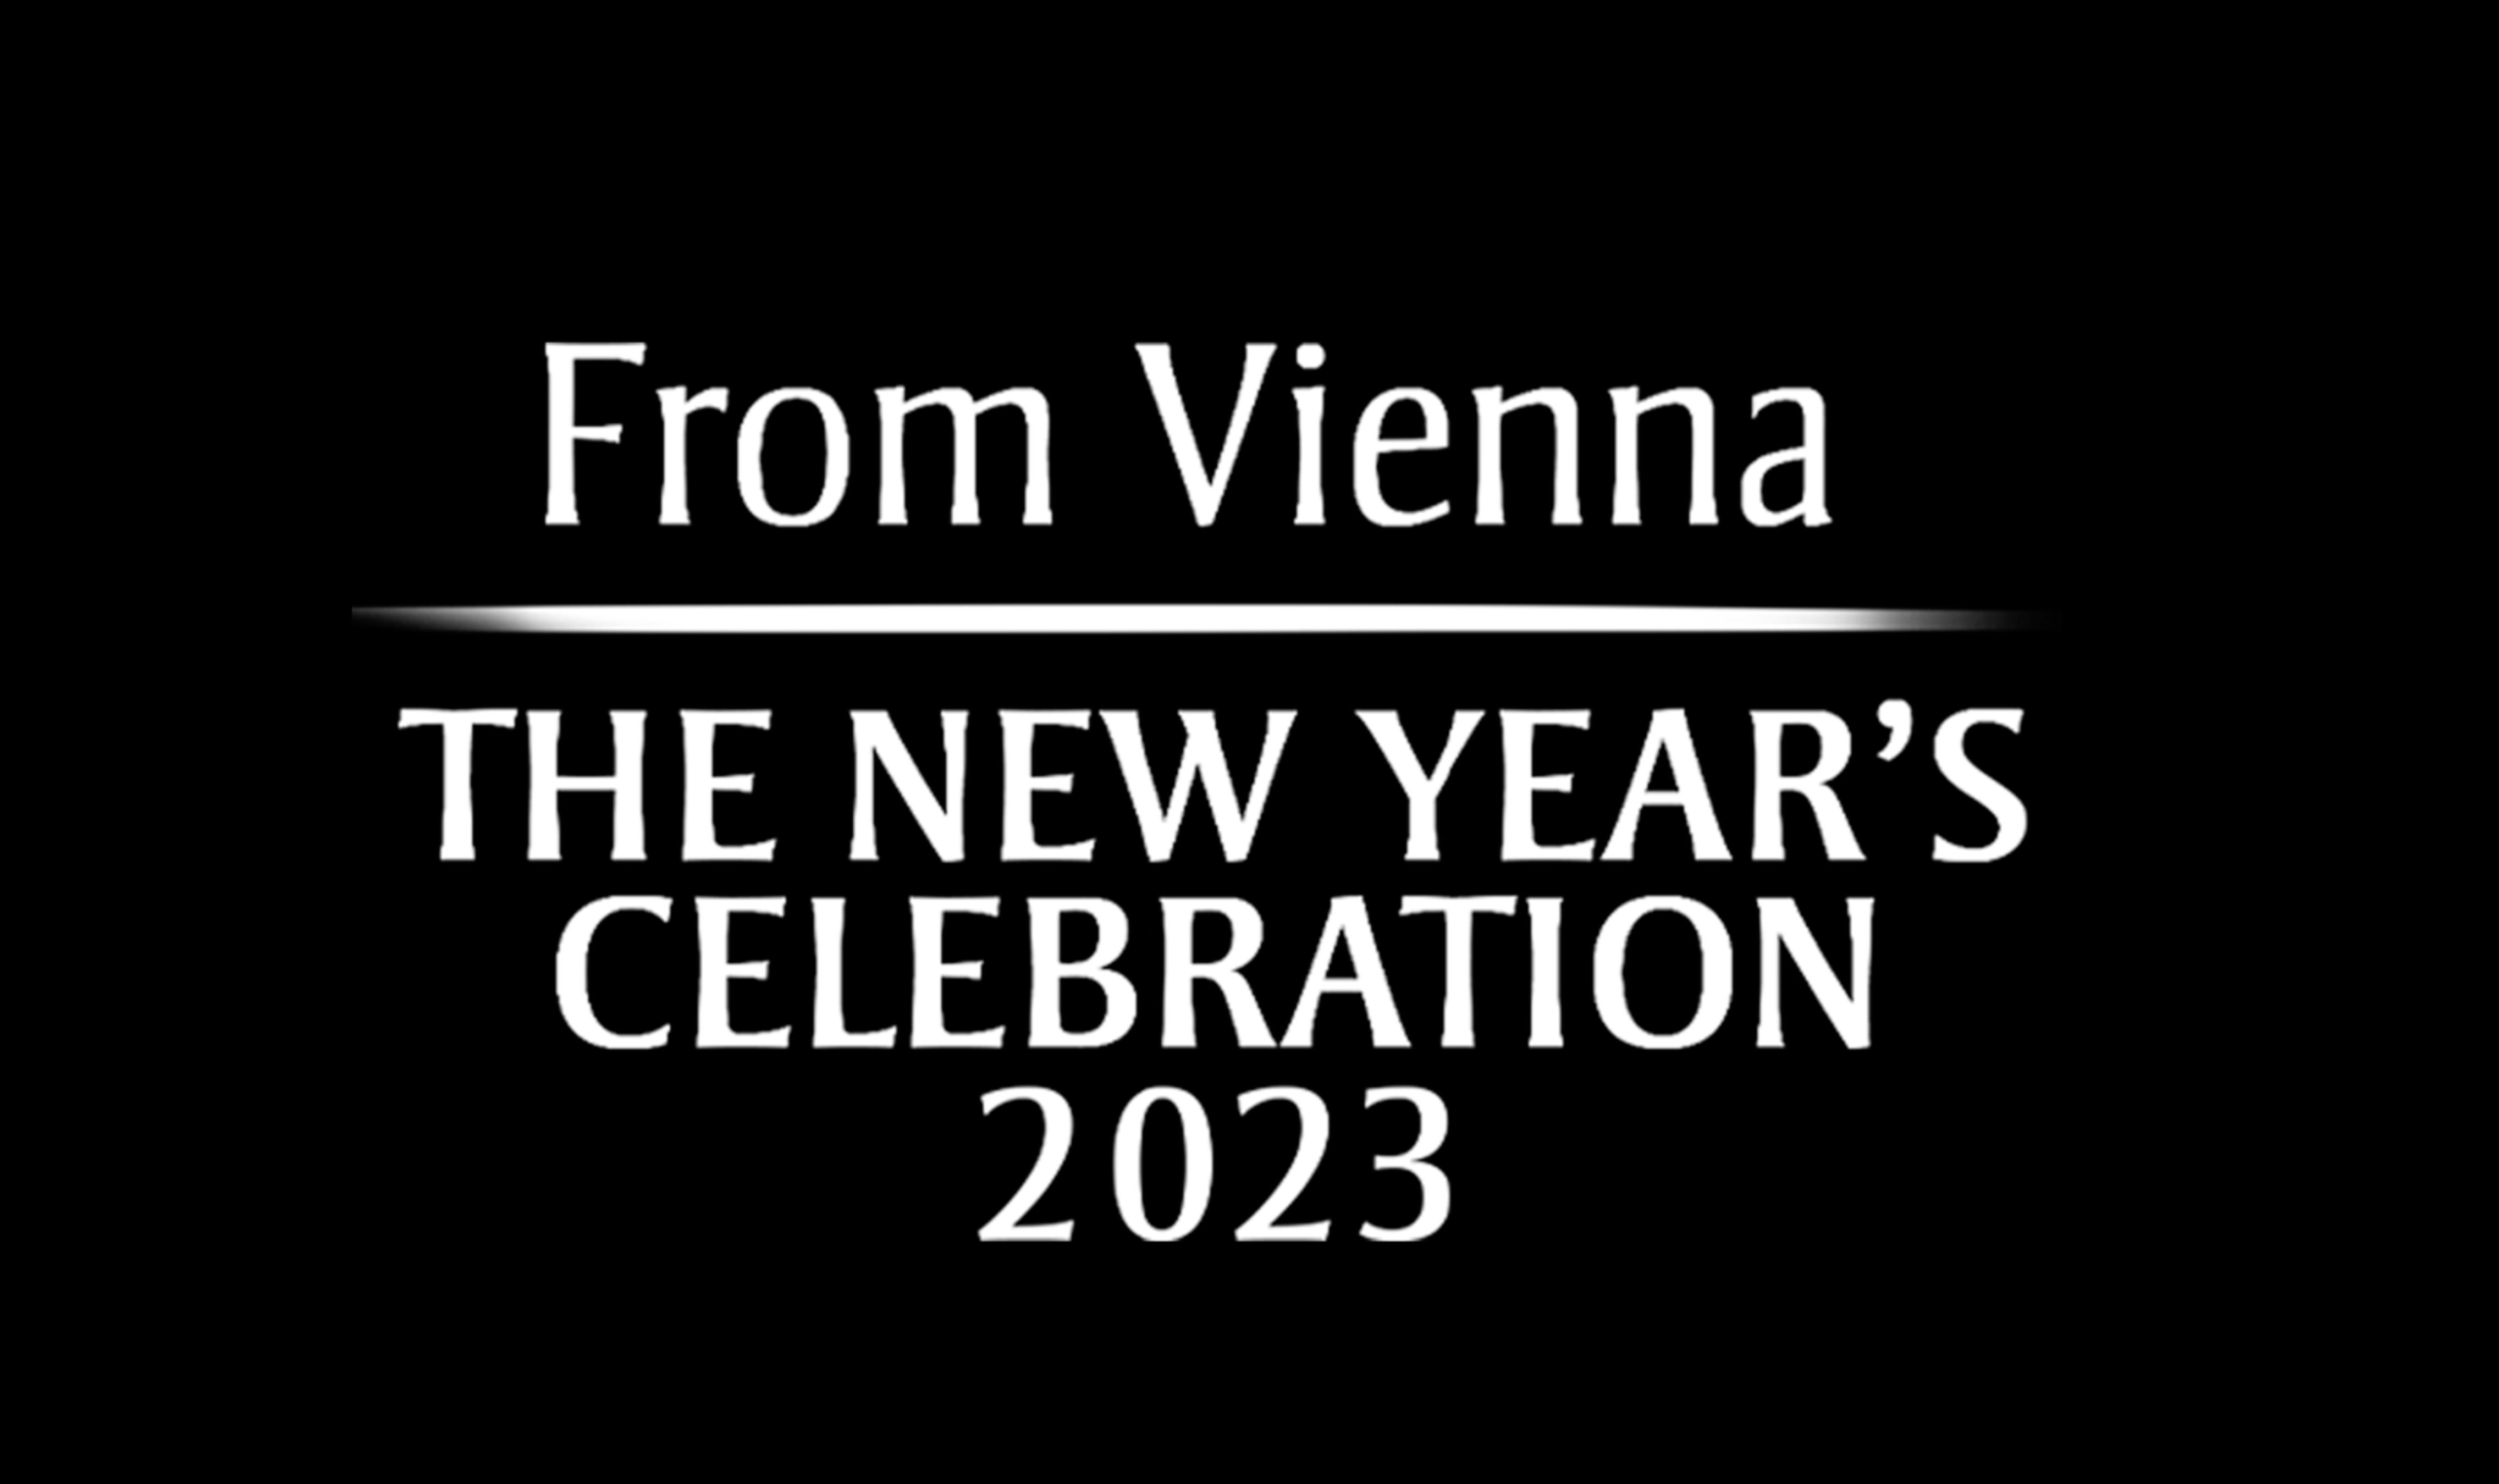 Great Performances From Vienna: The New Year’s Celebration 2023